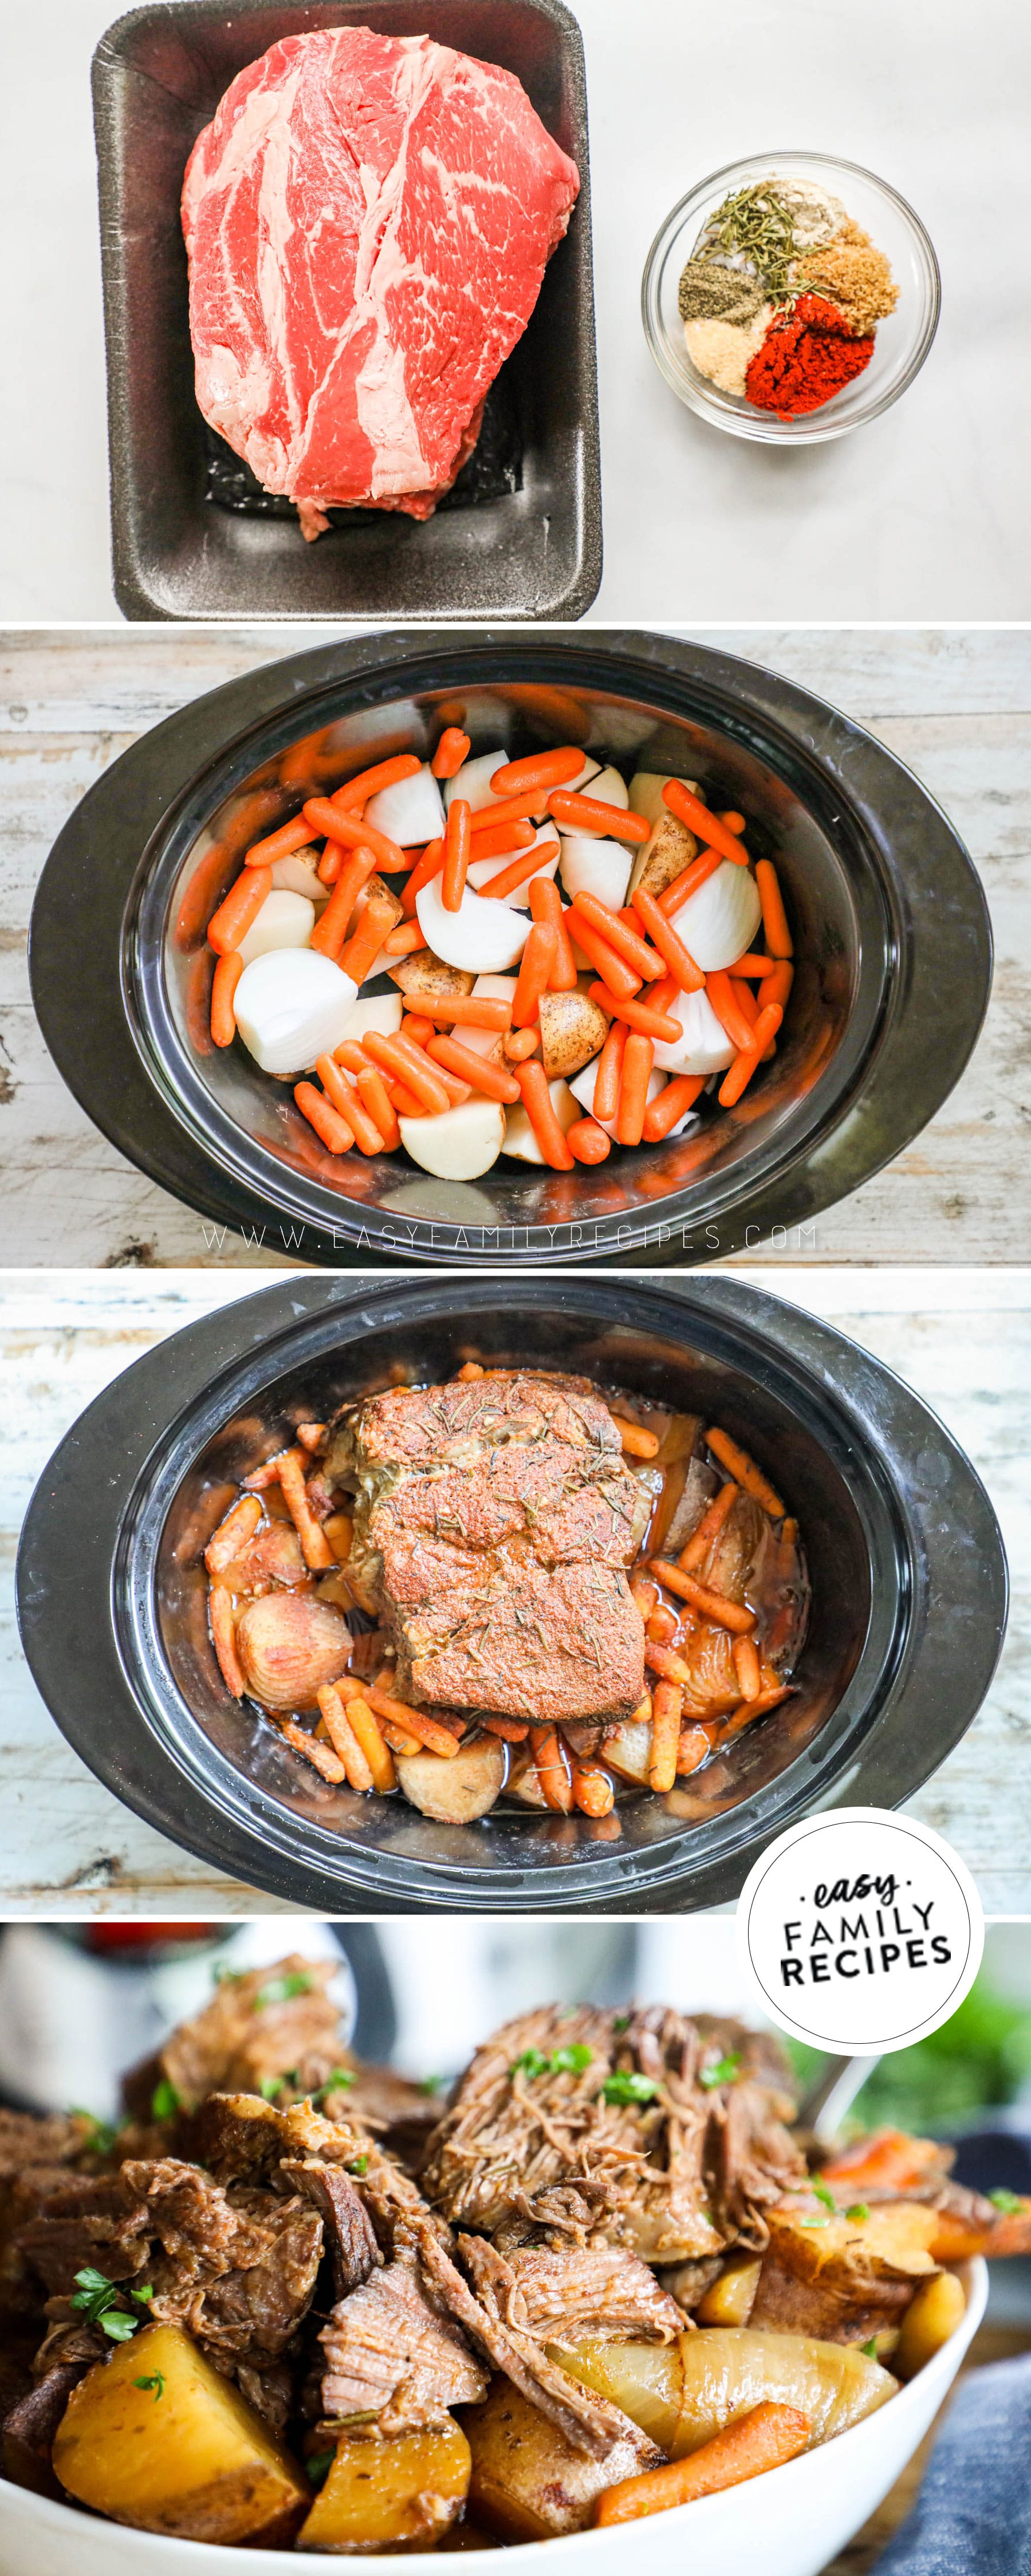 How to cook Southern pot roast 1)rub beef with seasonings 2)place veggies in slow cooker 3)cook beef on top for 6-9 hours 4)serve pot roast with veggies